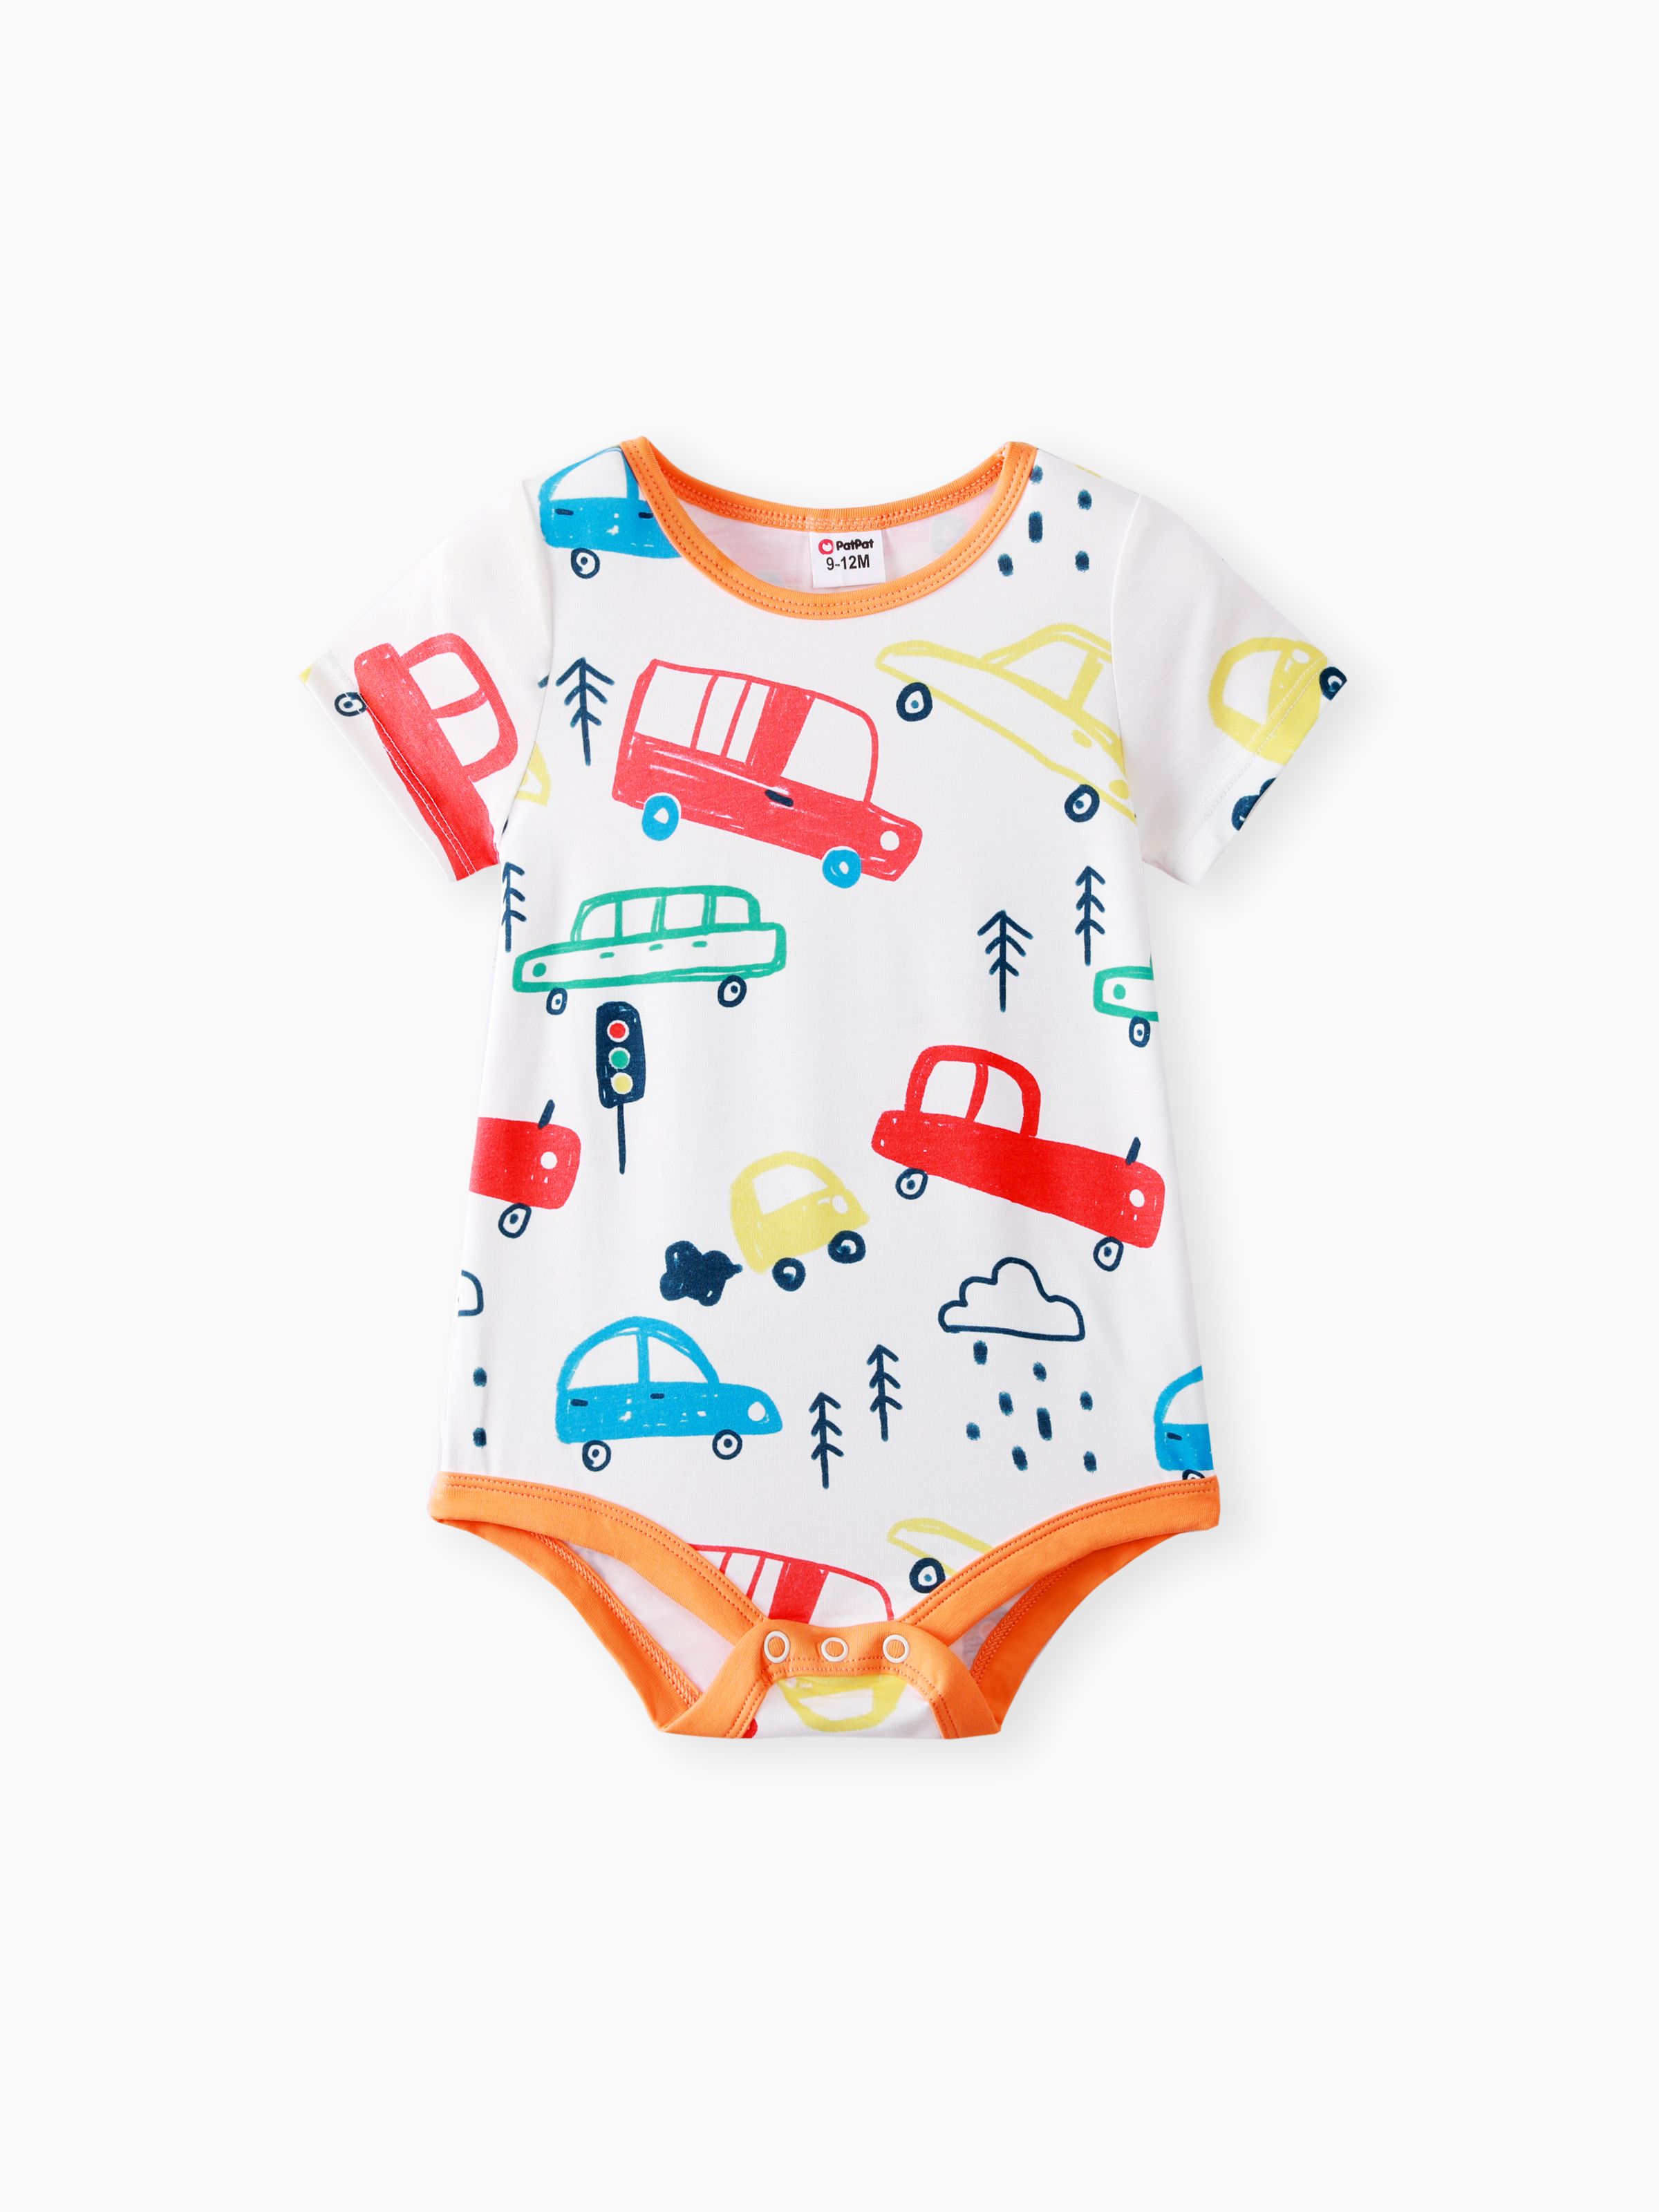 

Naia™ Baby Boy Colorful Striped or Vehicle Print Short-sleeve Romper